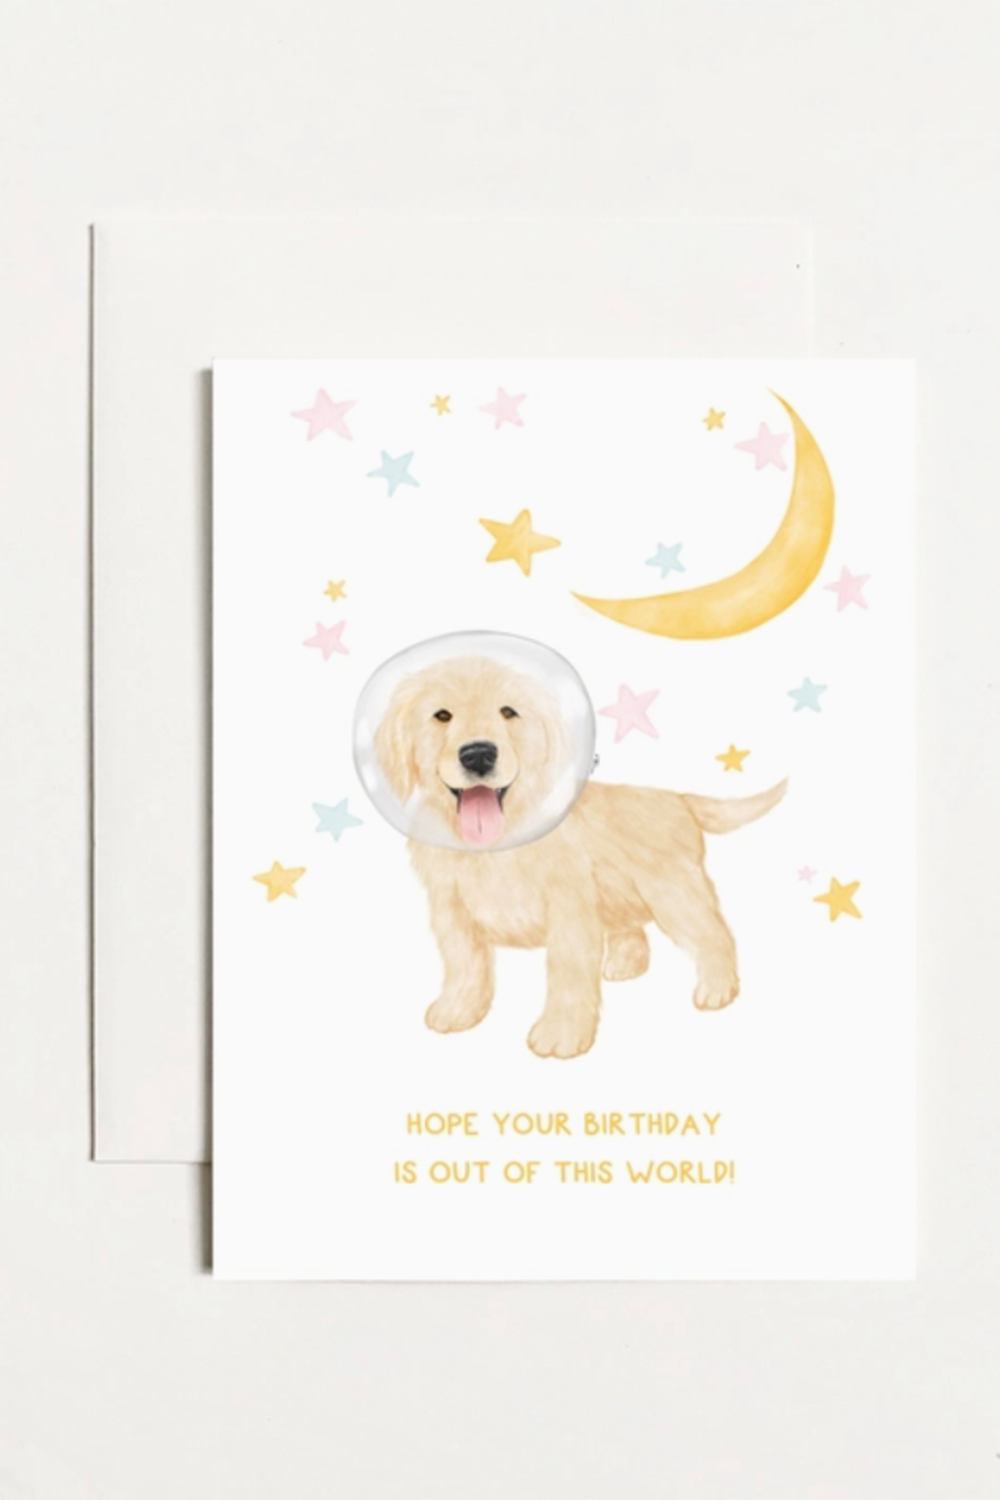 KP Birthday Greeting Card - Out of This World